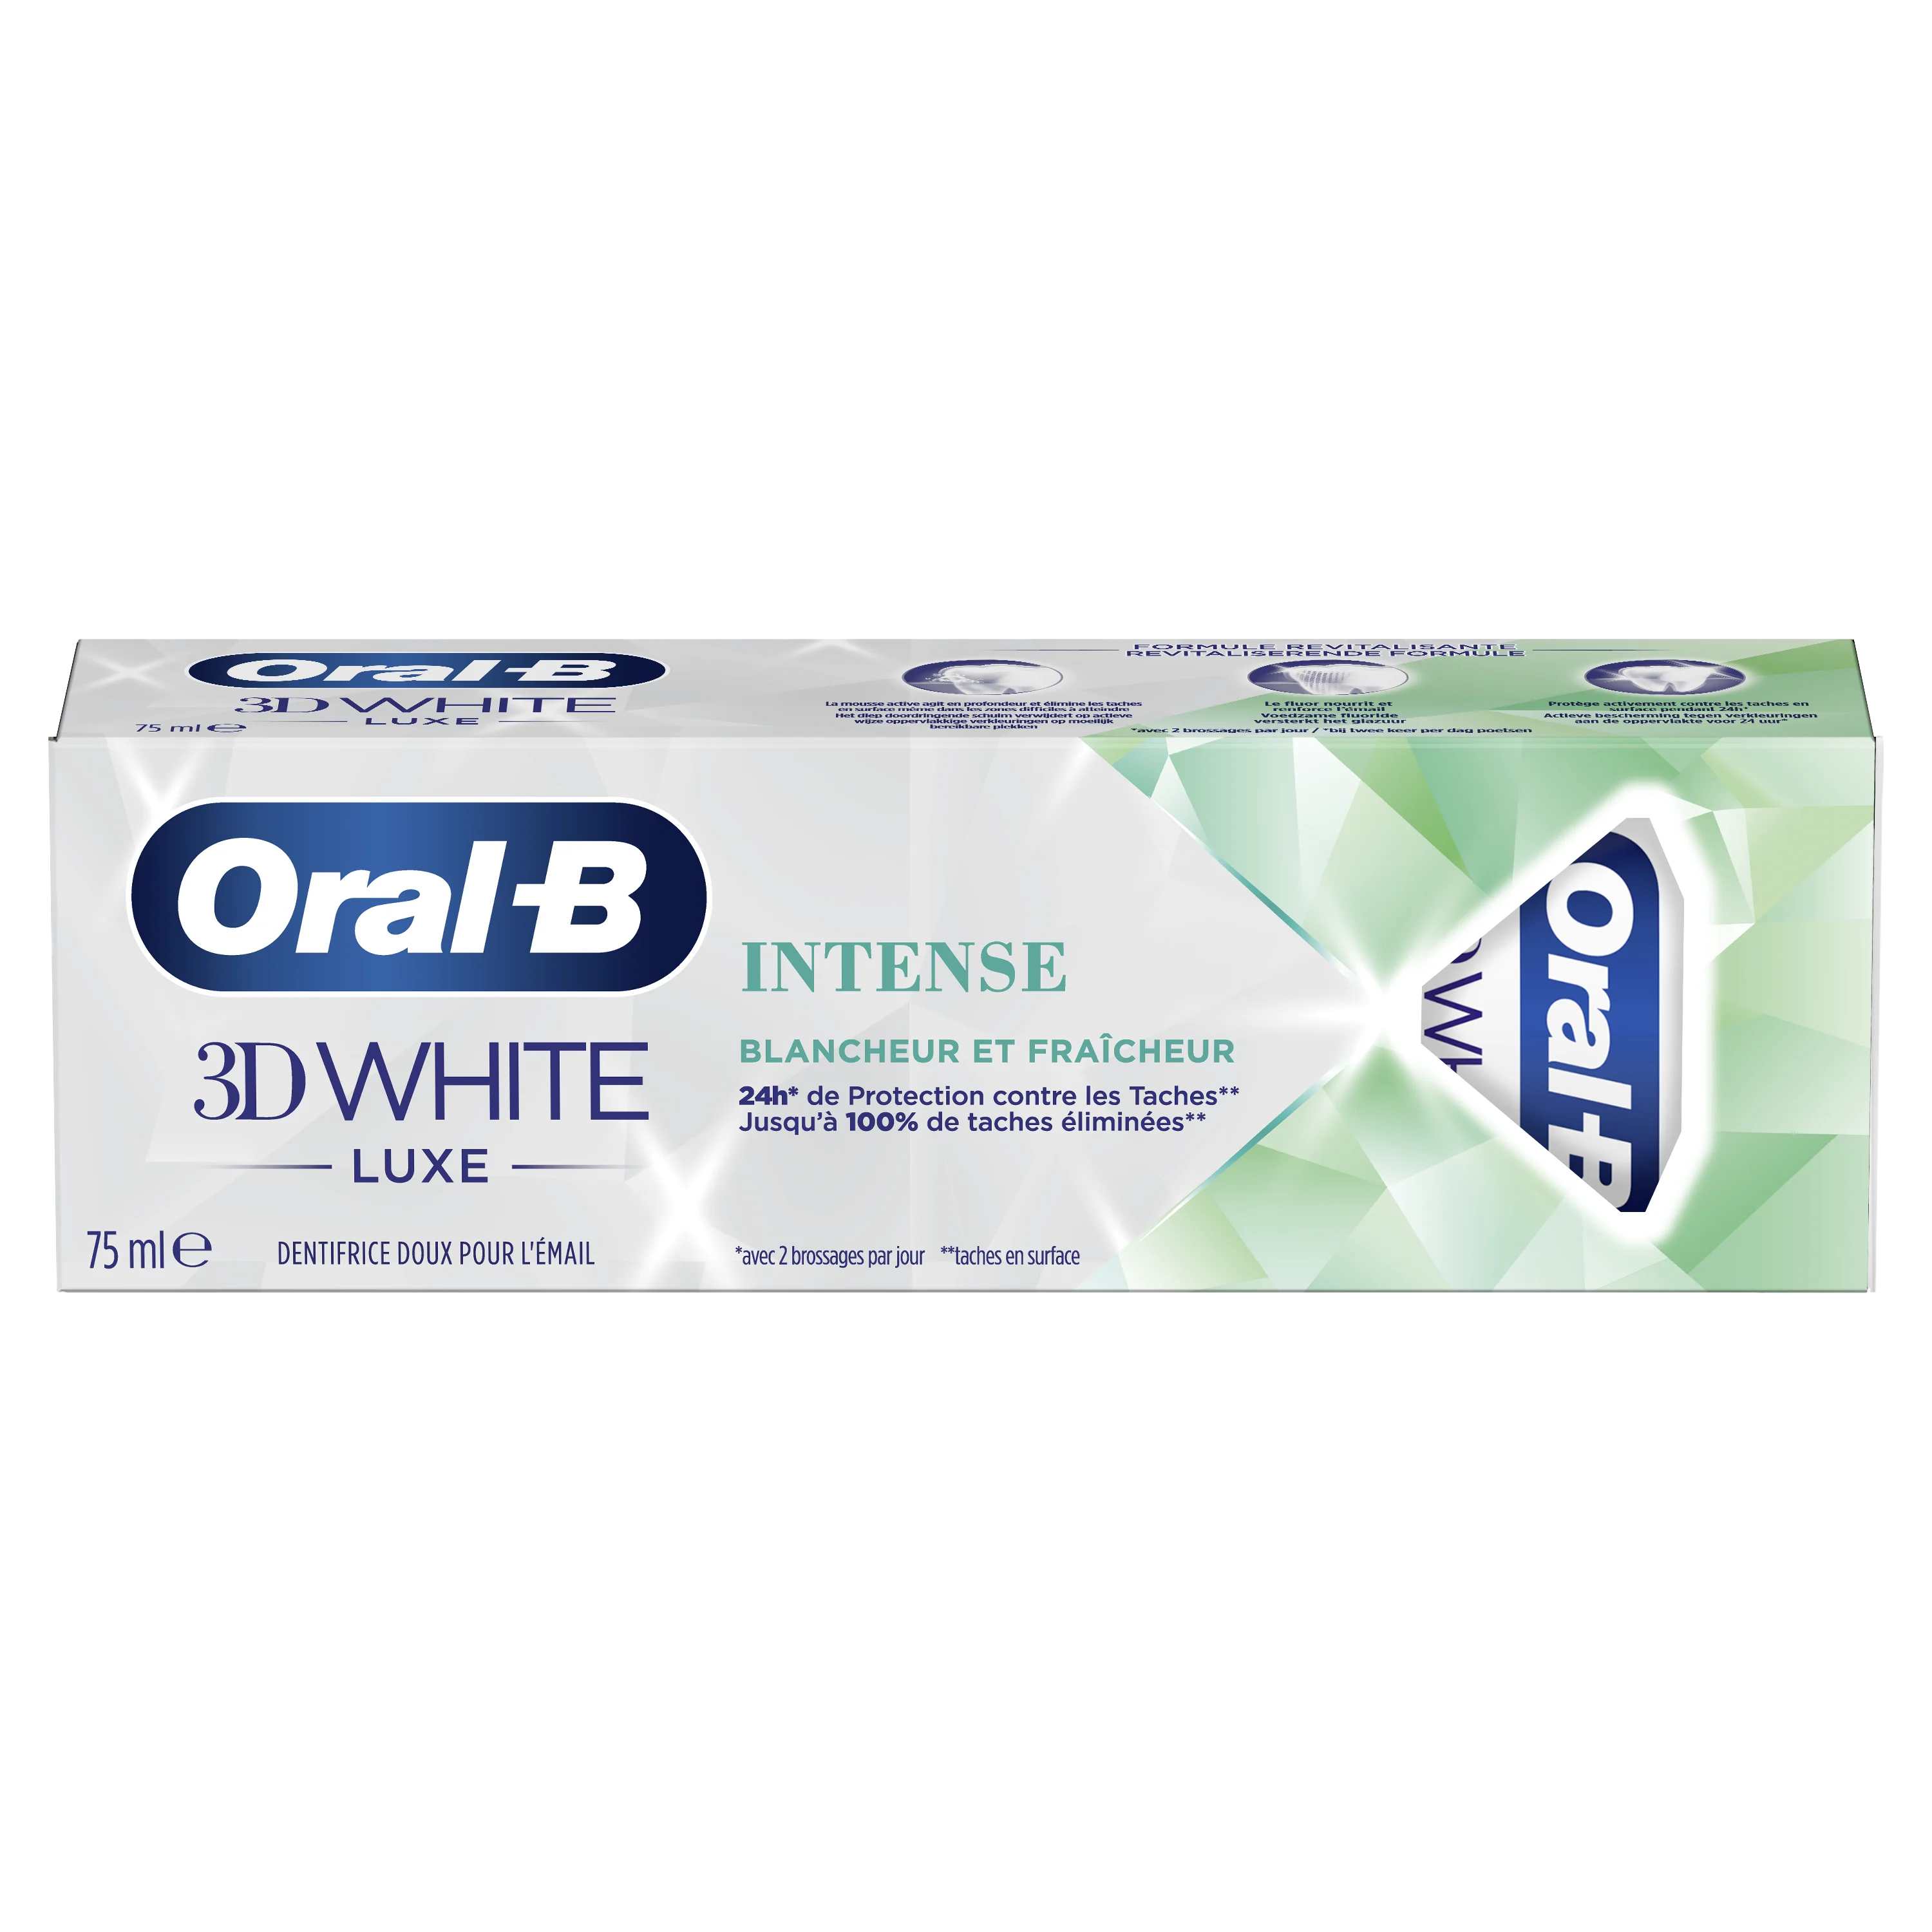 Dentifrice Oral-B 3D White Luxe Intense undefined